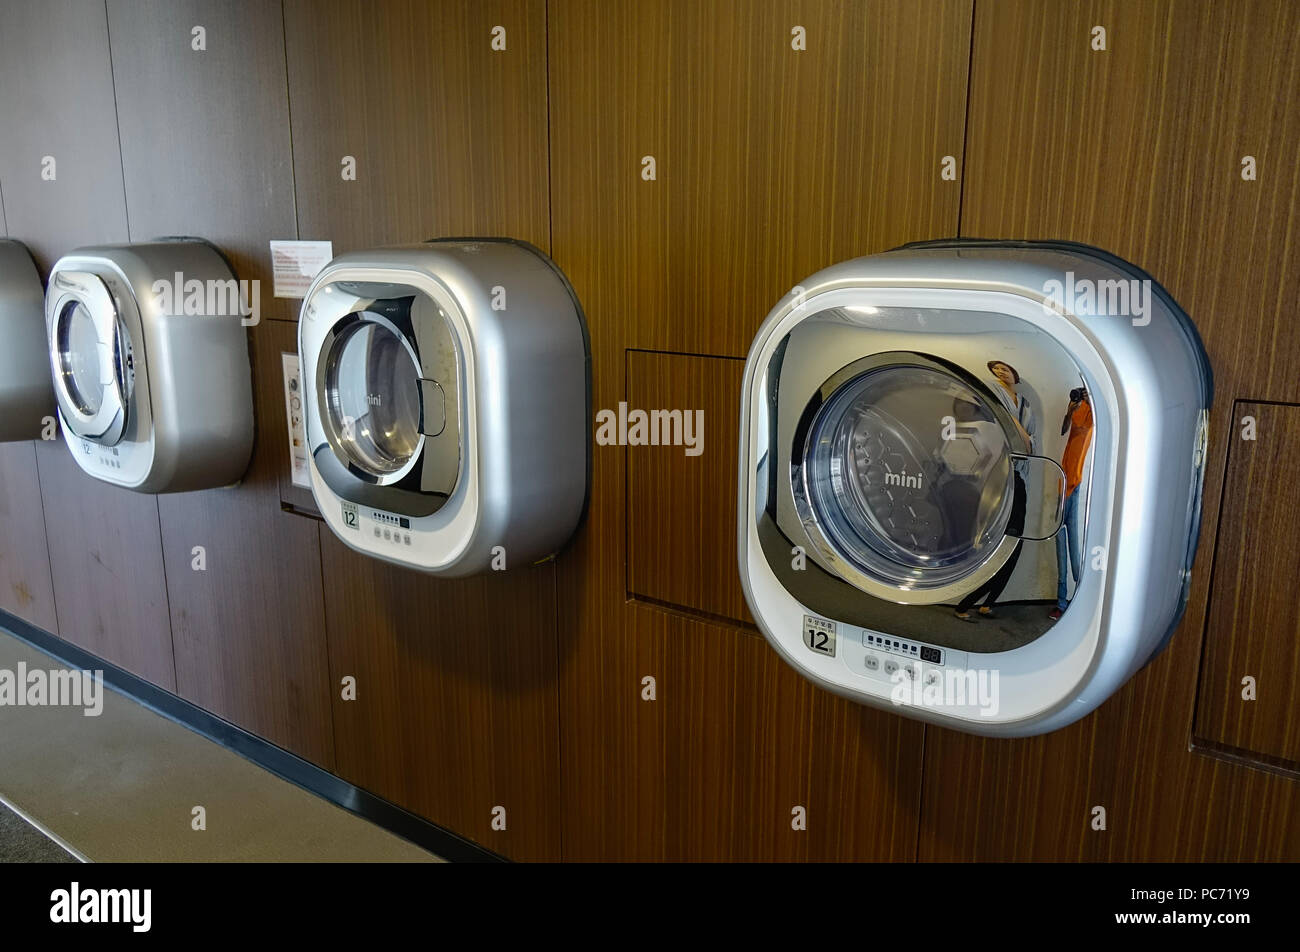 Seoul, South Korea - Sep 21, 2016. Automatic washing machines at laundry service of Western-style cheap hotel in Seoul, South Korea. Stock Photo